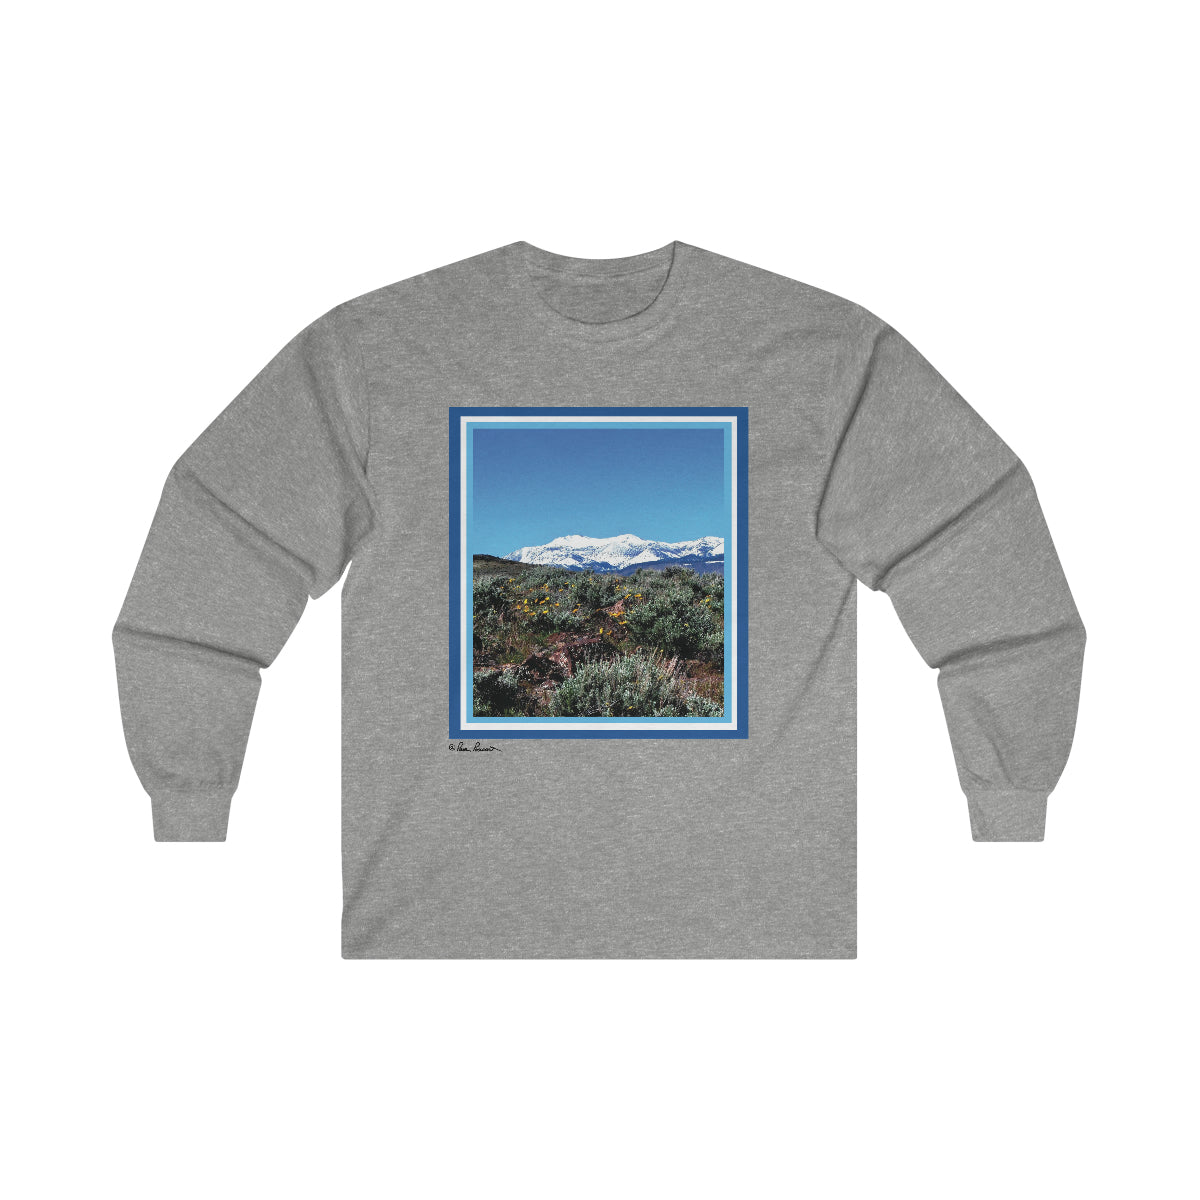 Flat front view of the Sports Grey t-shirt